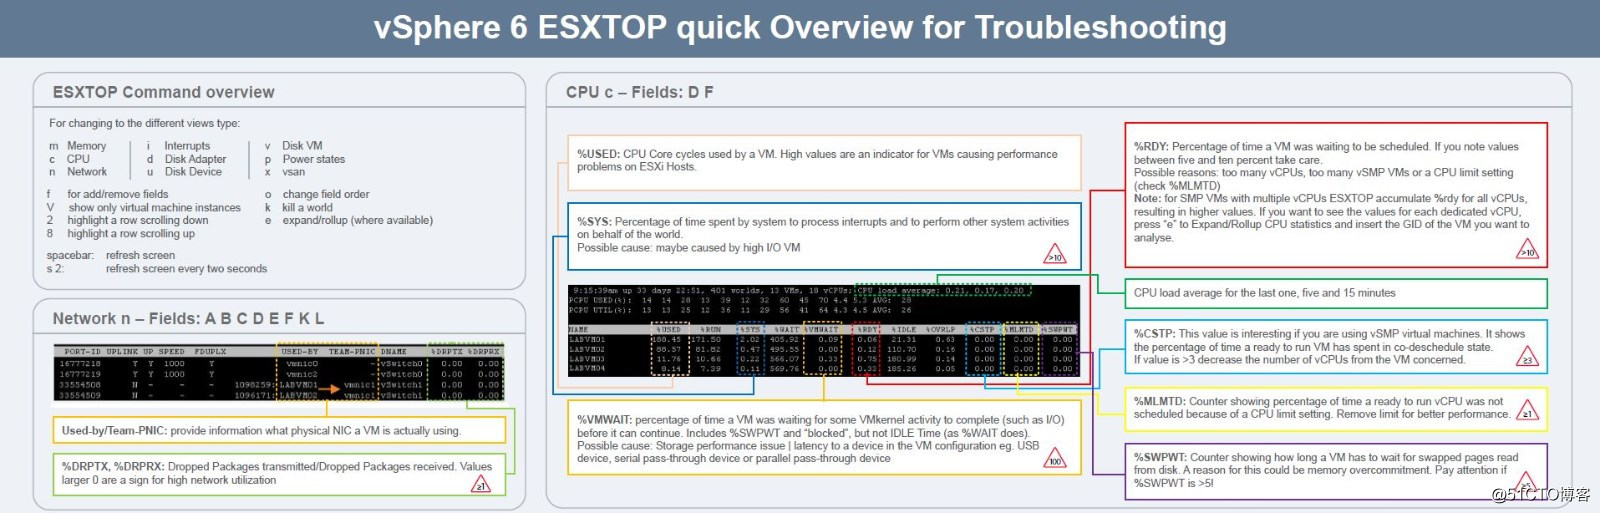 vSphere 6 ESXTOP Overview for Troubleshooting